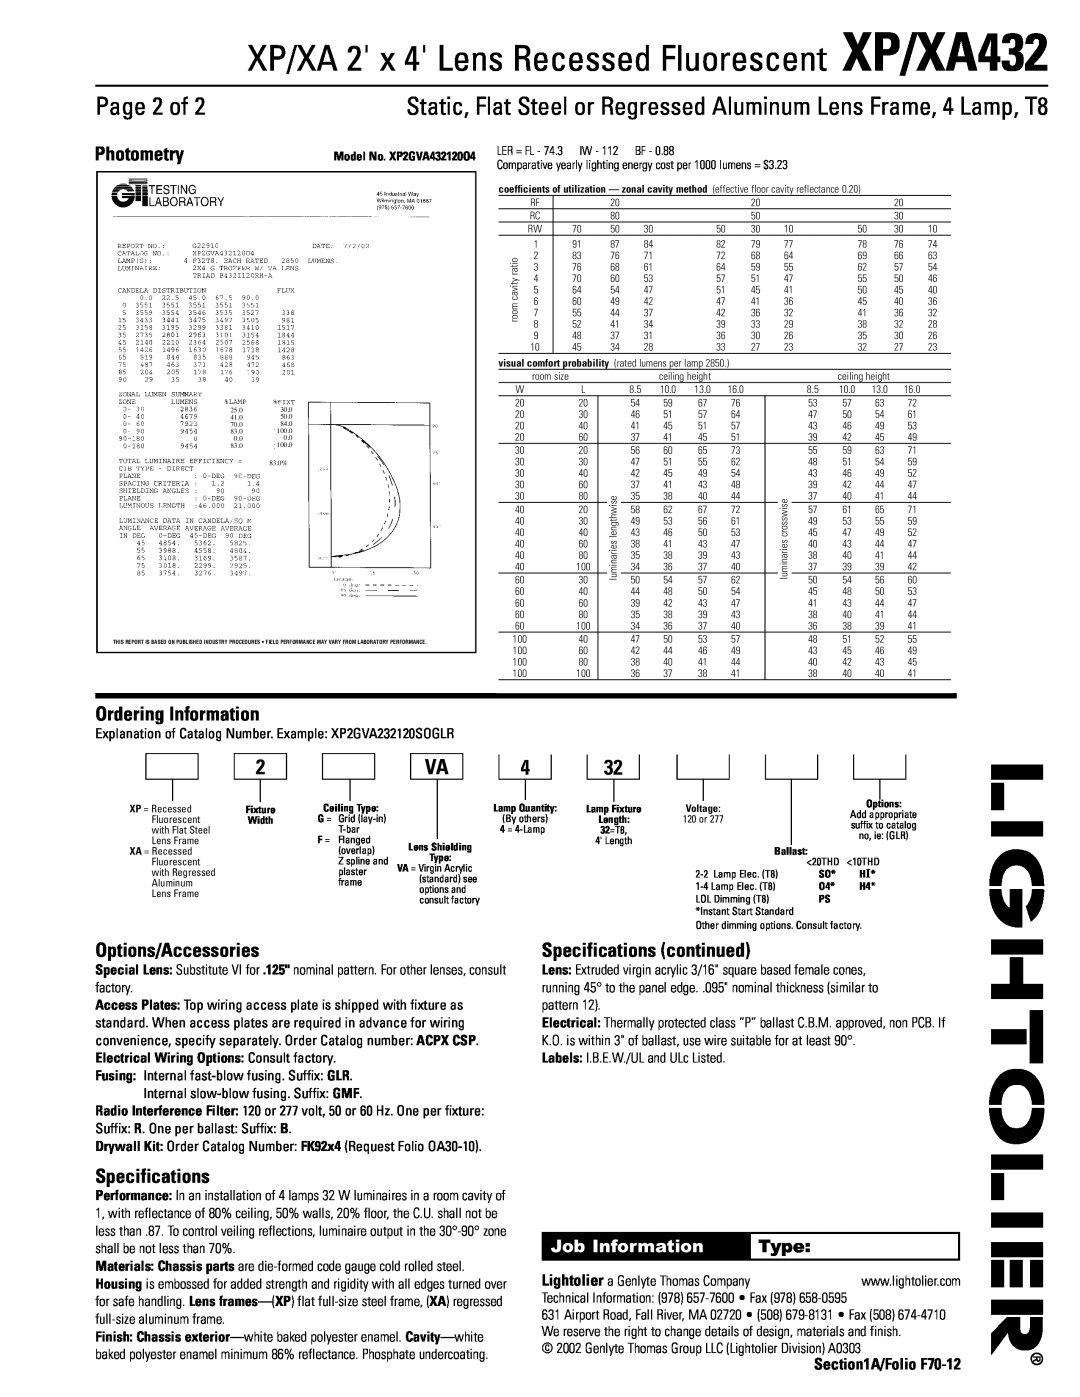 Lightolier XP432, XA432 Page 2 of, Photometry, Ordering Information, Options/Accessories, Specifications continued, Type 